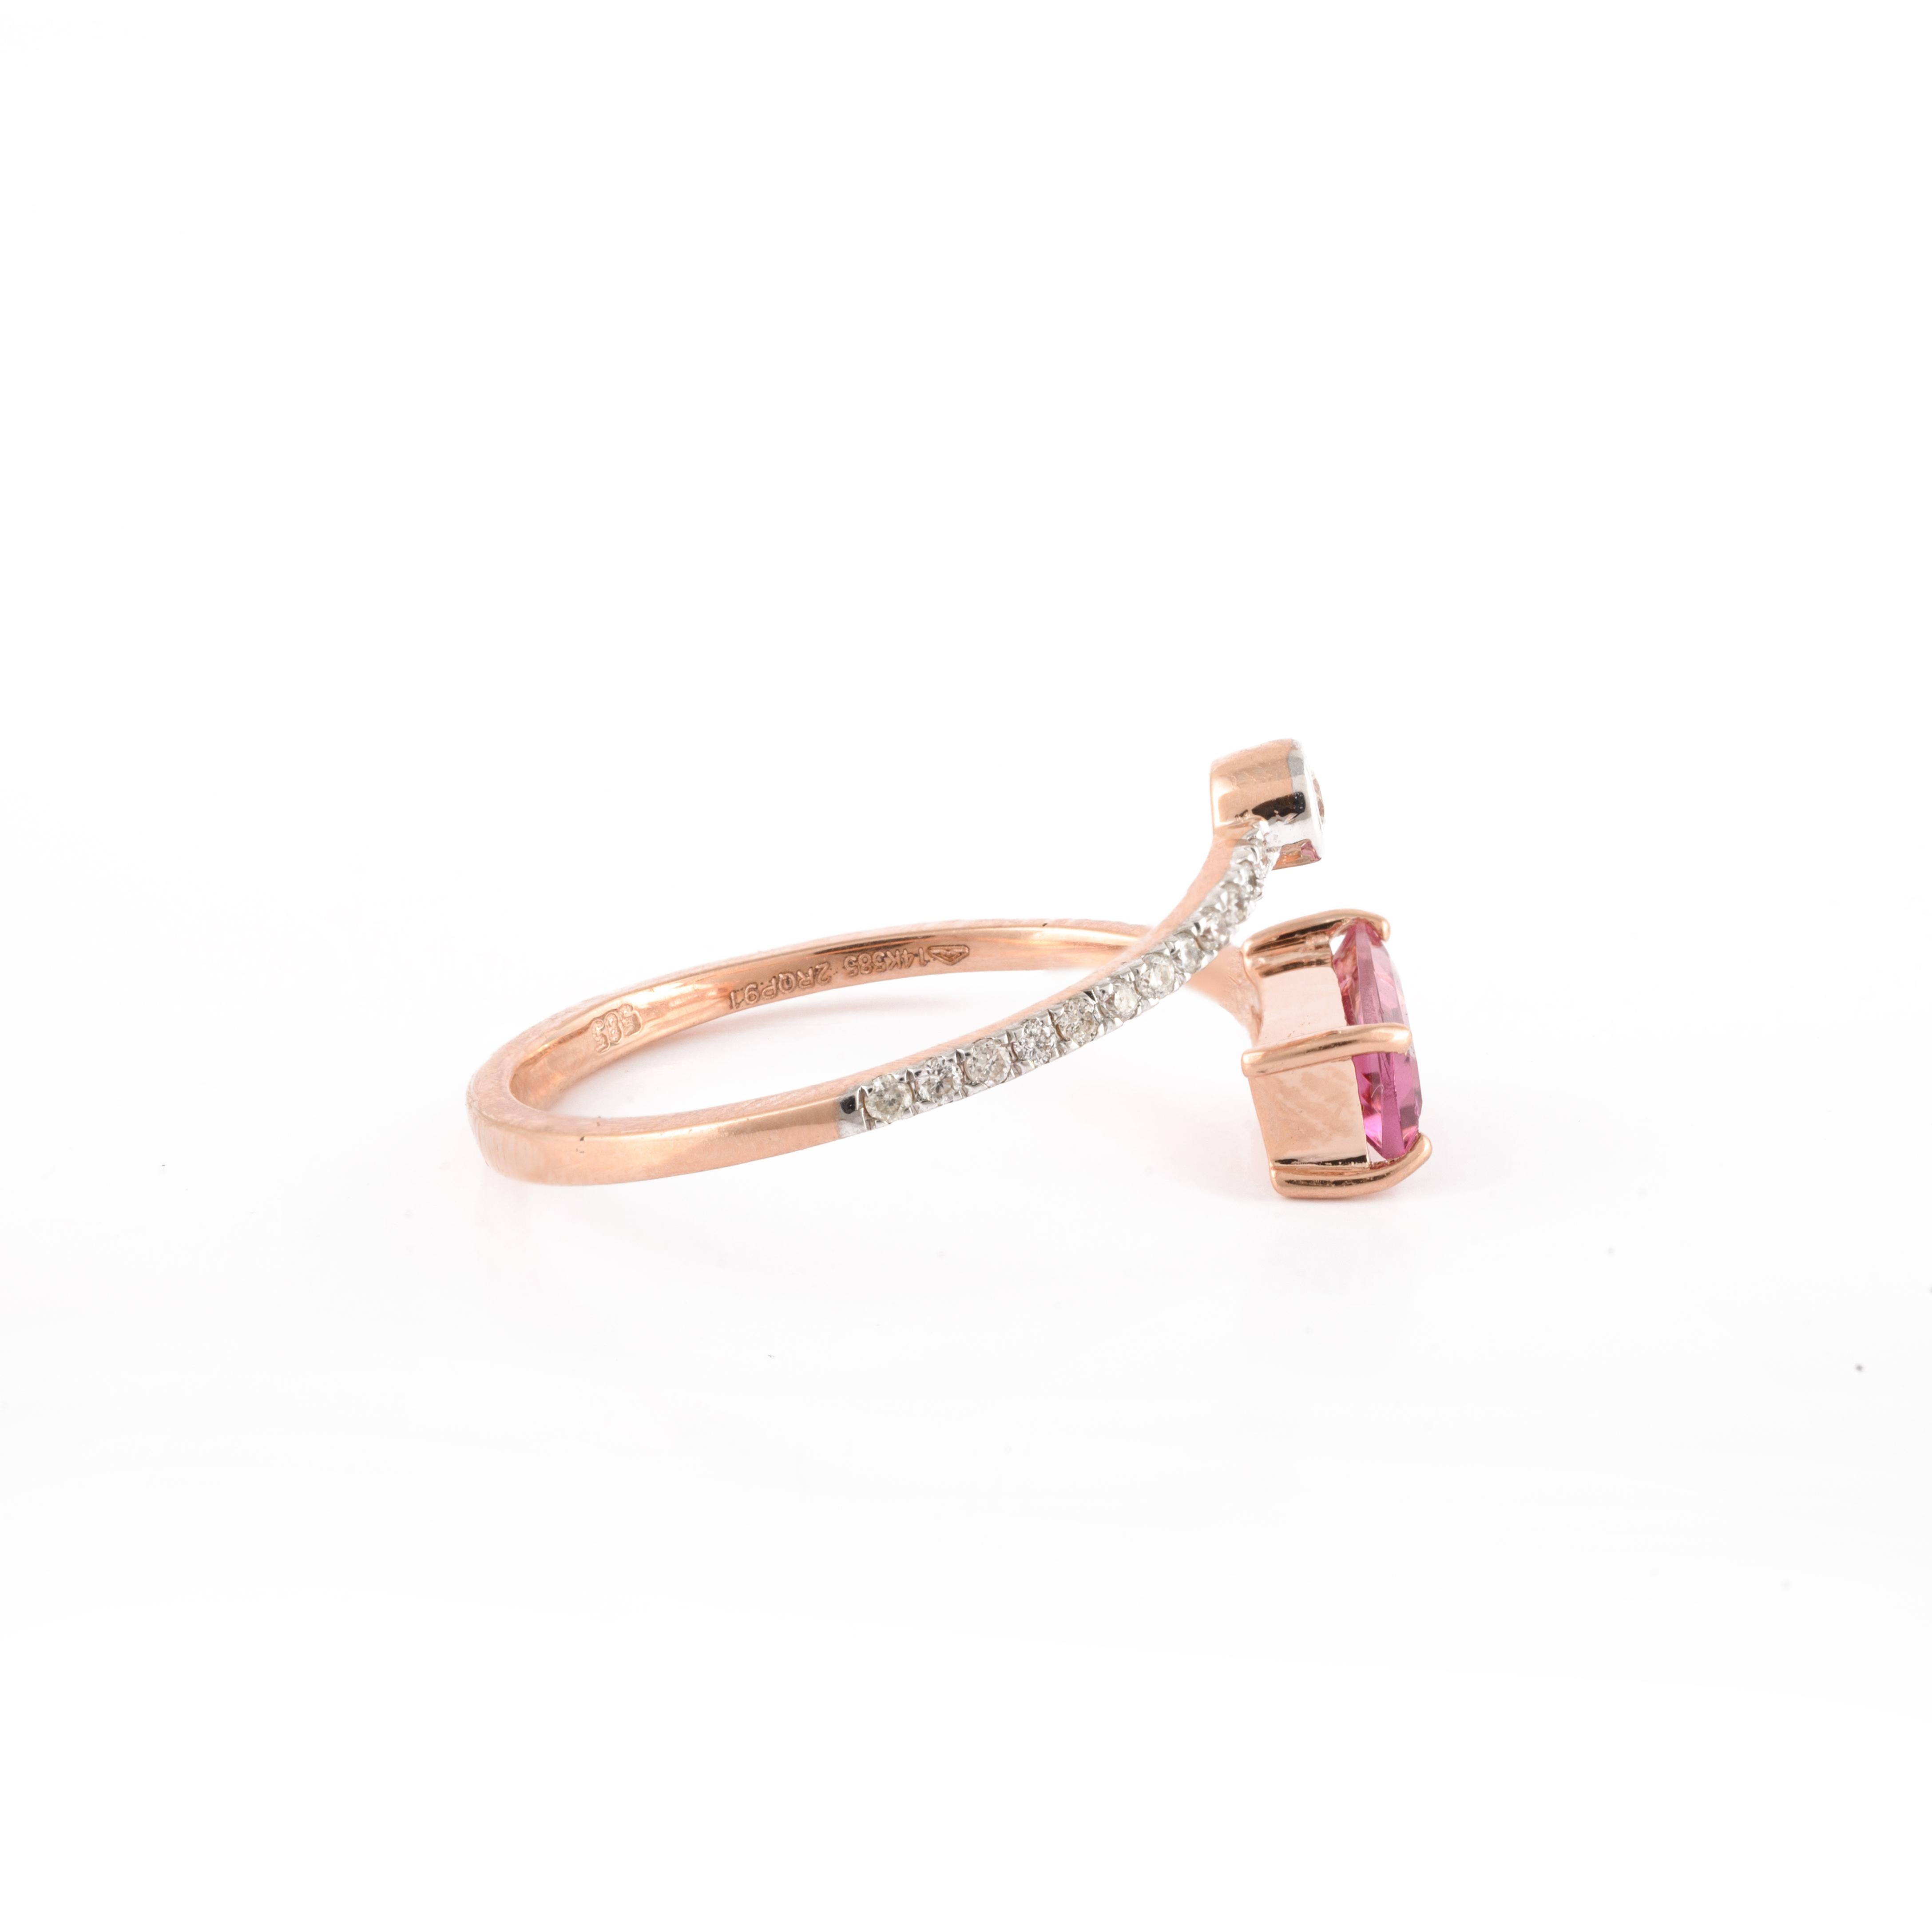 For Sale:  14k Solid Rose Gold Diamond and Baguette Cut Pink Tourmaline Wrap Ring 5